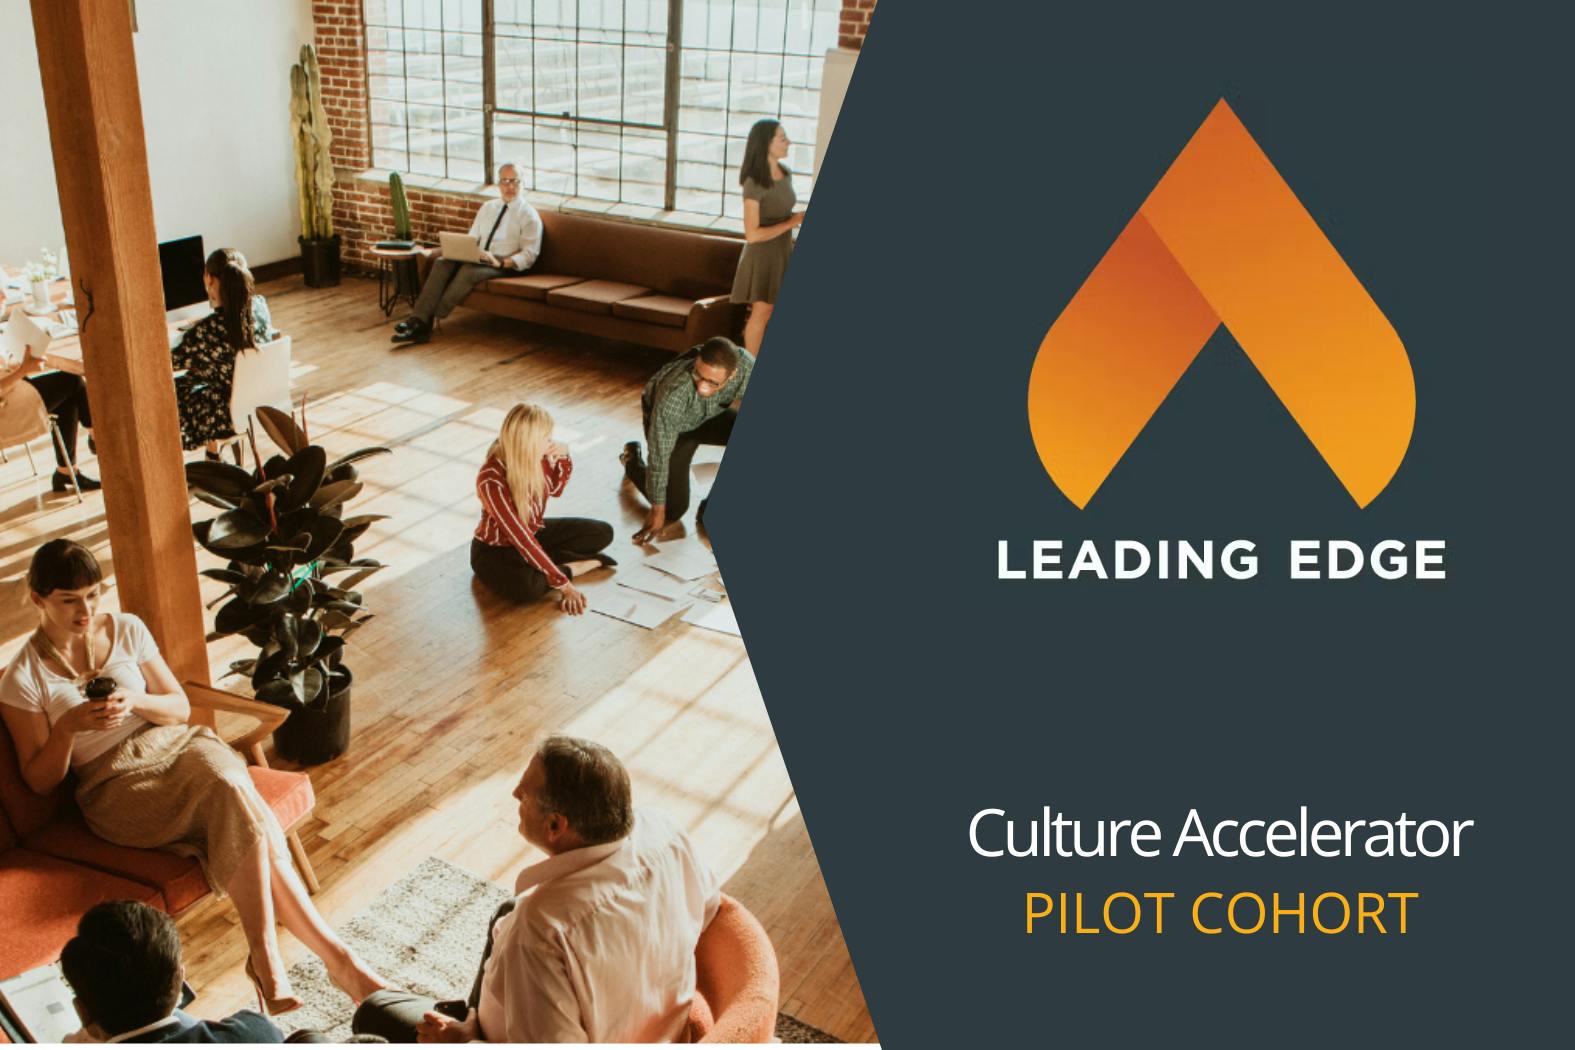 (L-R) Employees talk in various groups, Text: Leading Edge Culture Accelerator Pilot Cohort